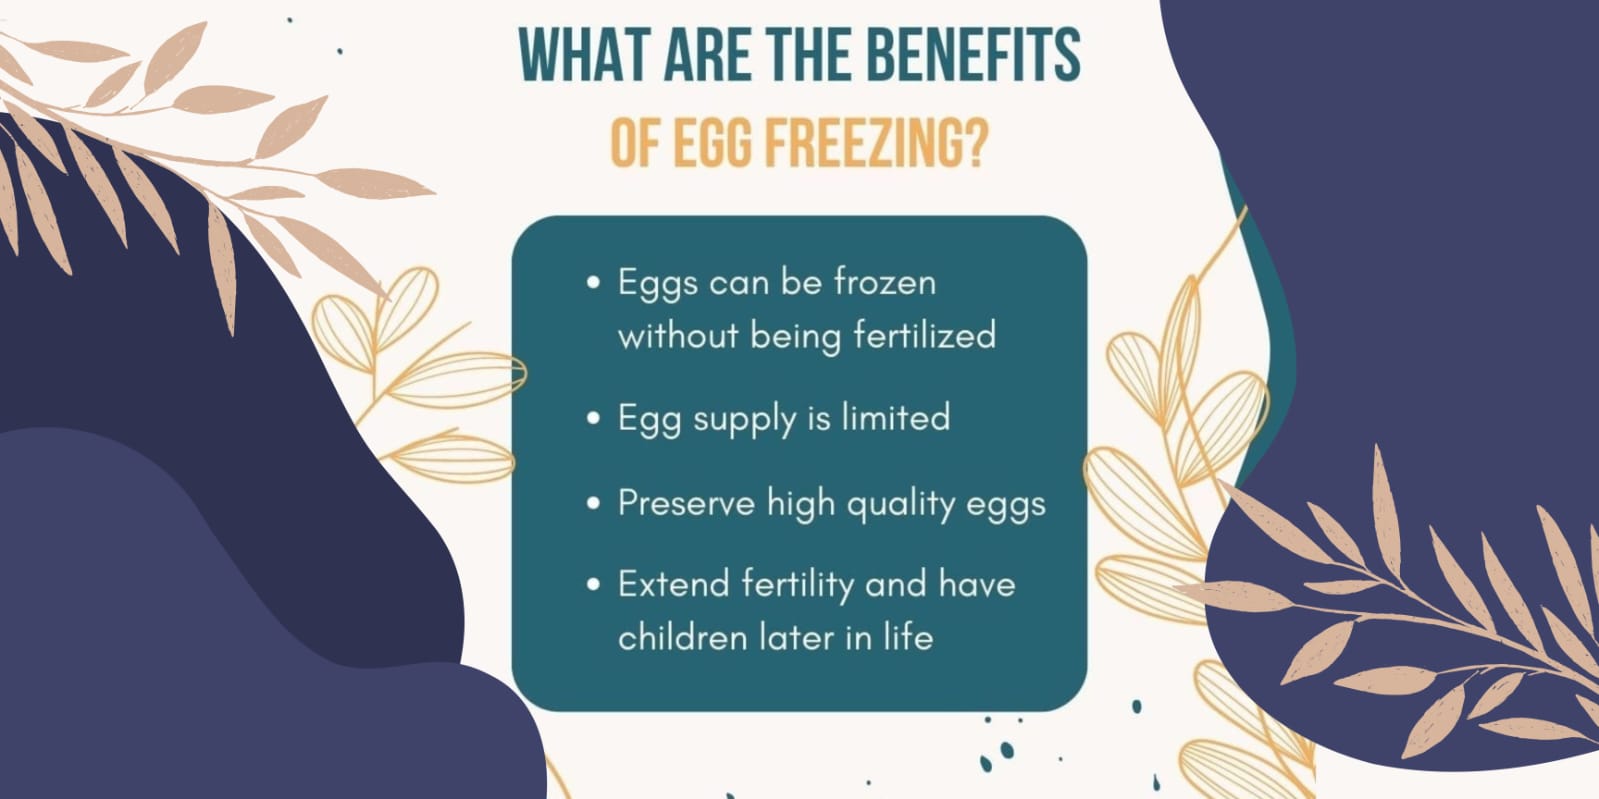 What are the benefits of egg freezing?